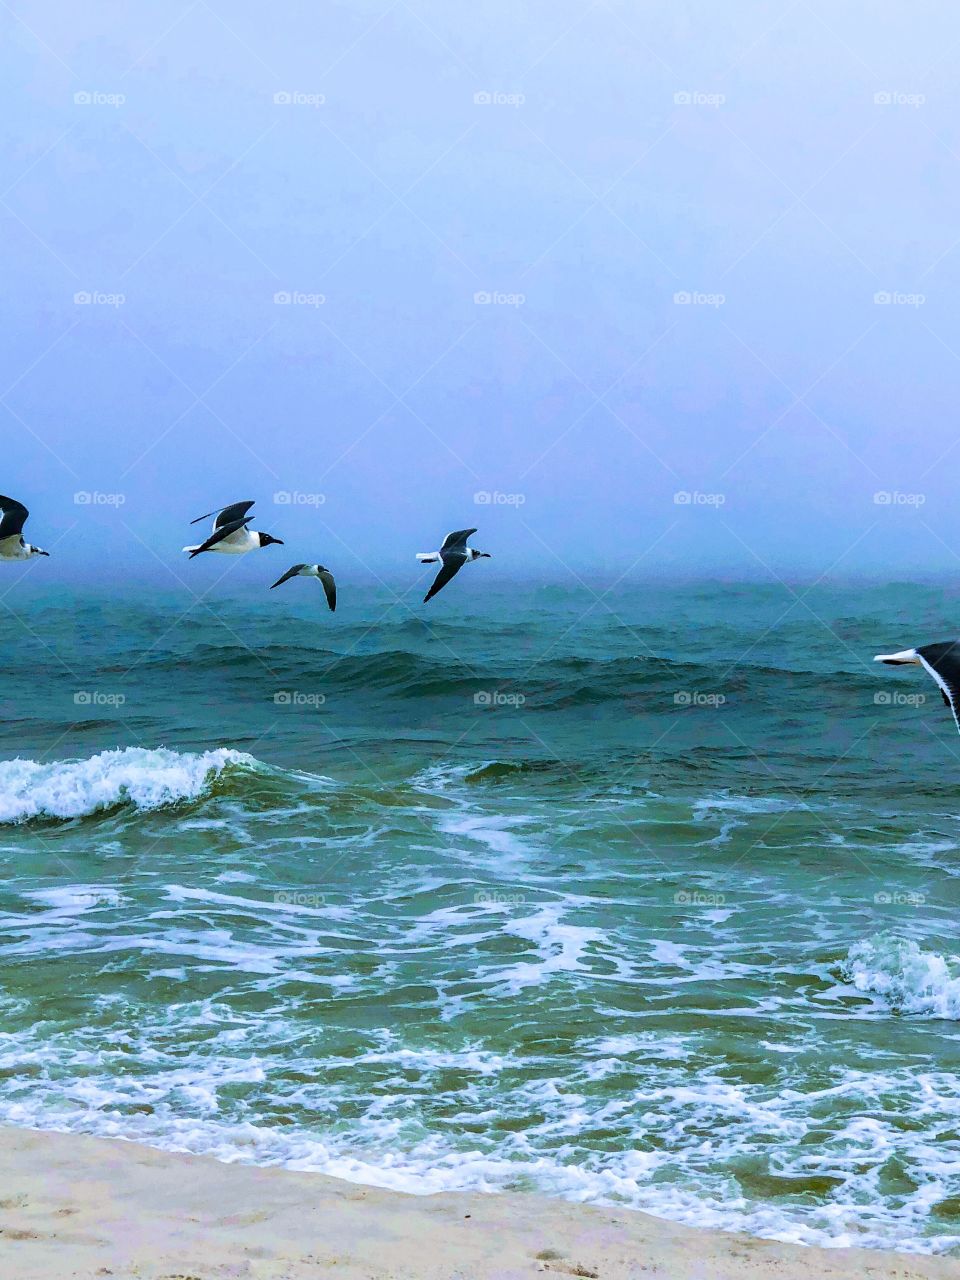 Birds flying over water and waves at the beach